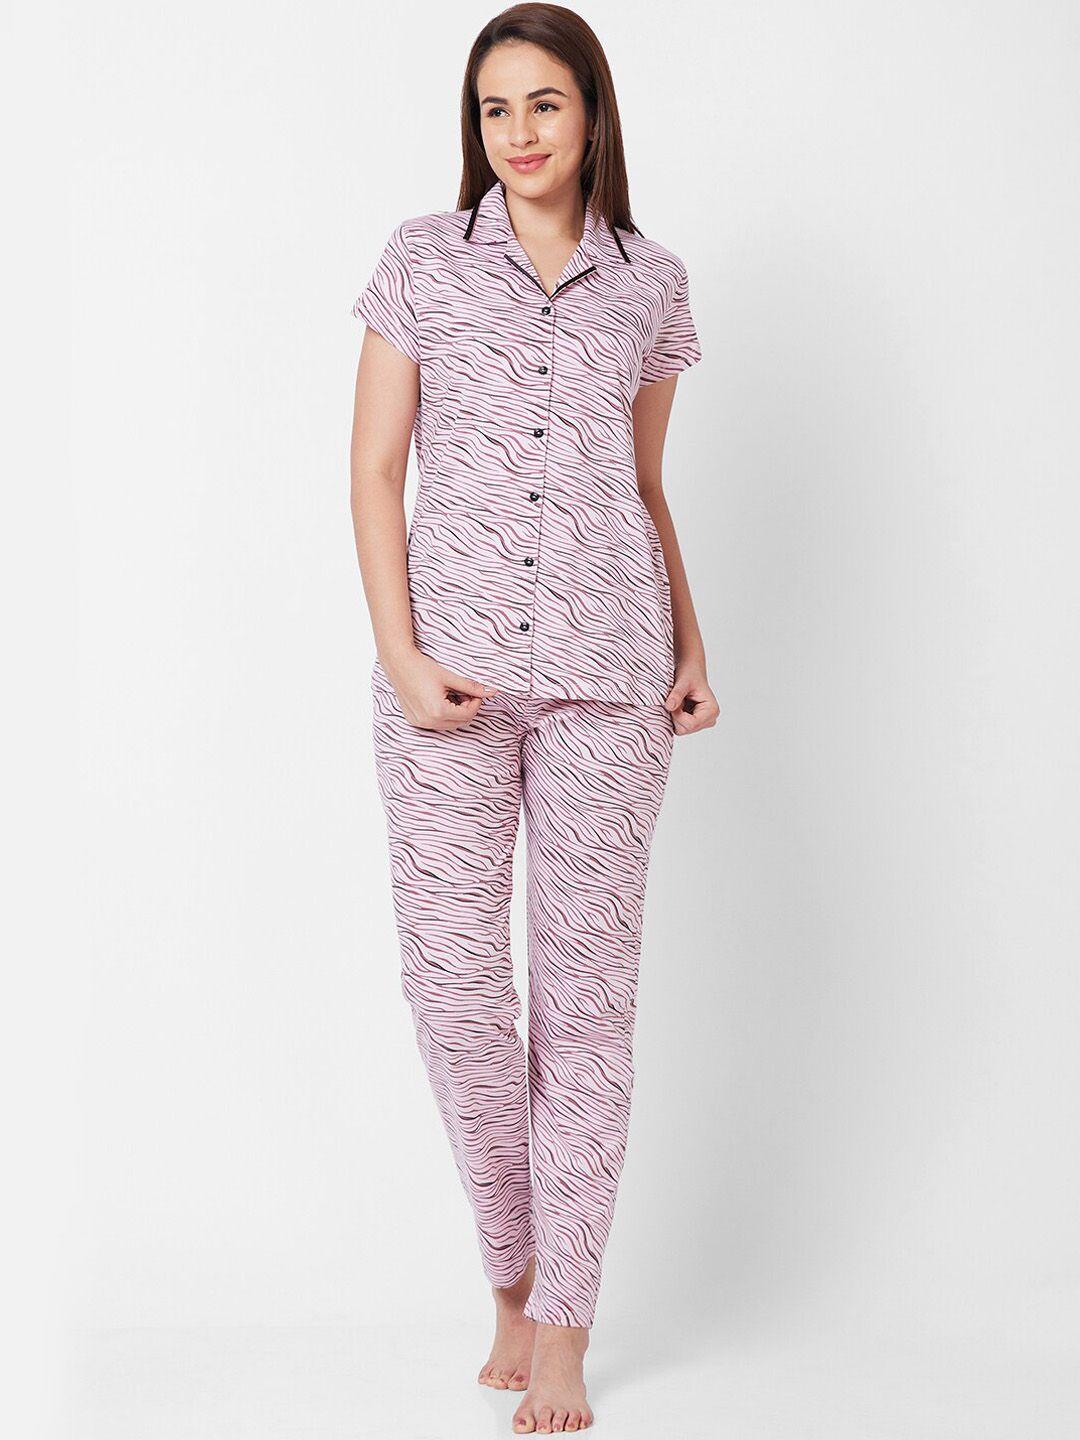 juliet abstract printed pure cotton night suit